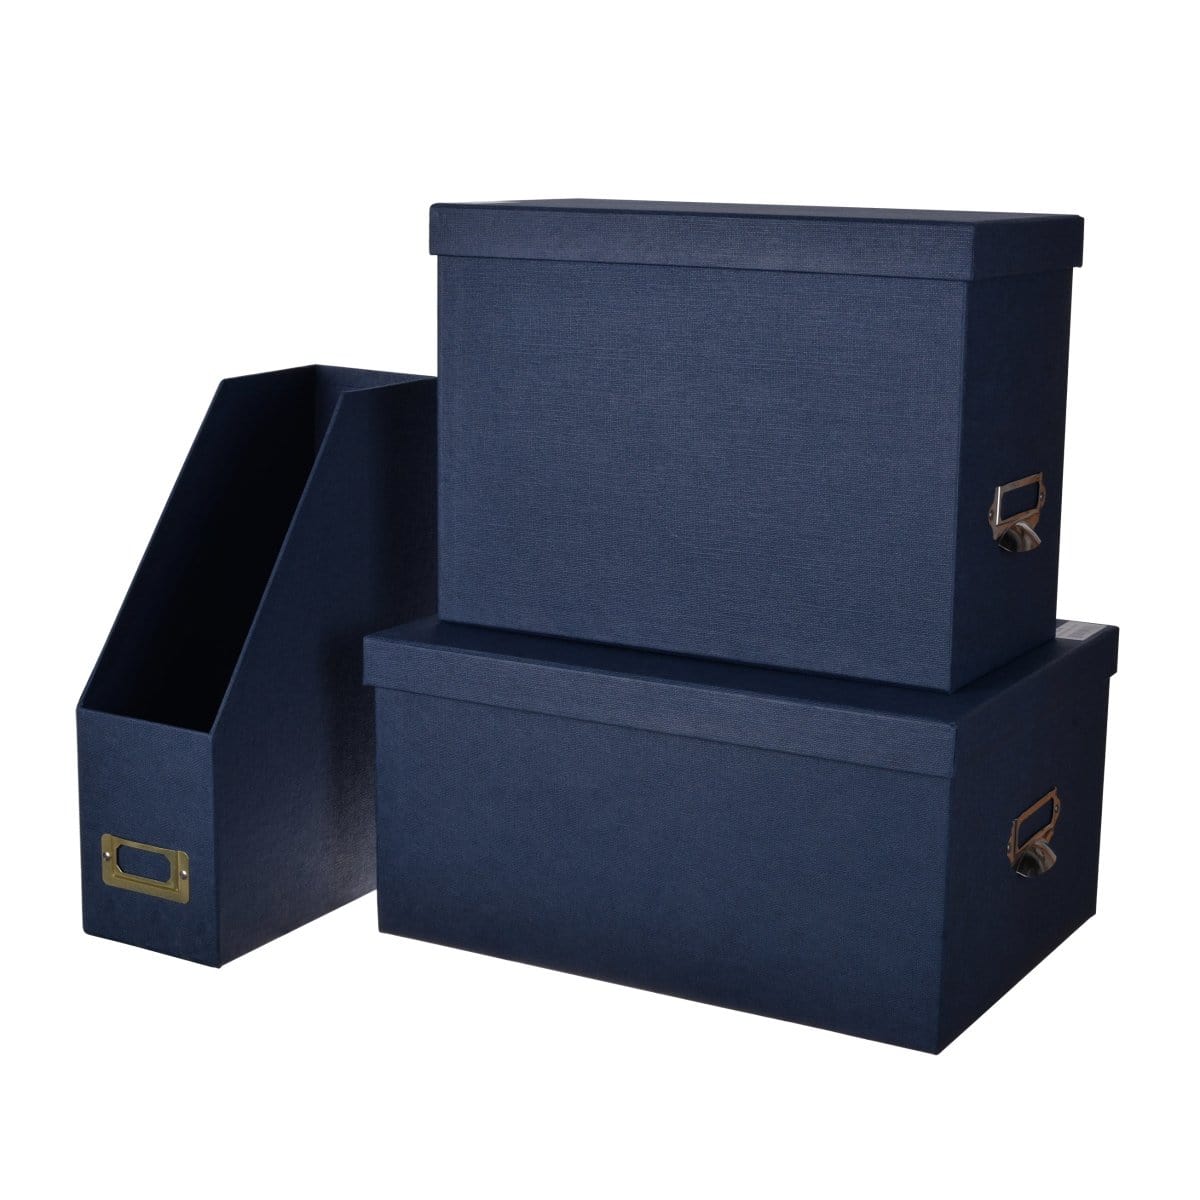 AB-42027 S/3 ISMAY OFFICE STORAGE BOXES & FILE,BLUE picket and rail